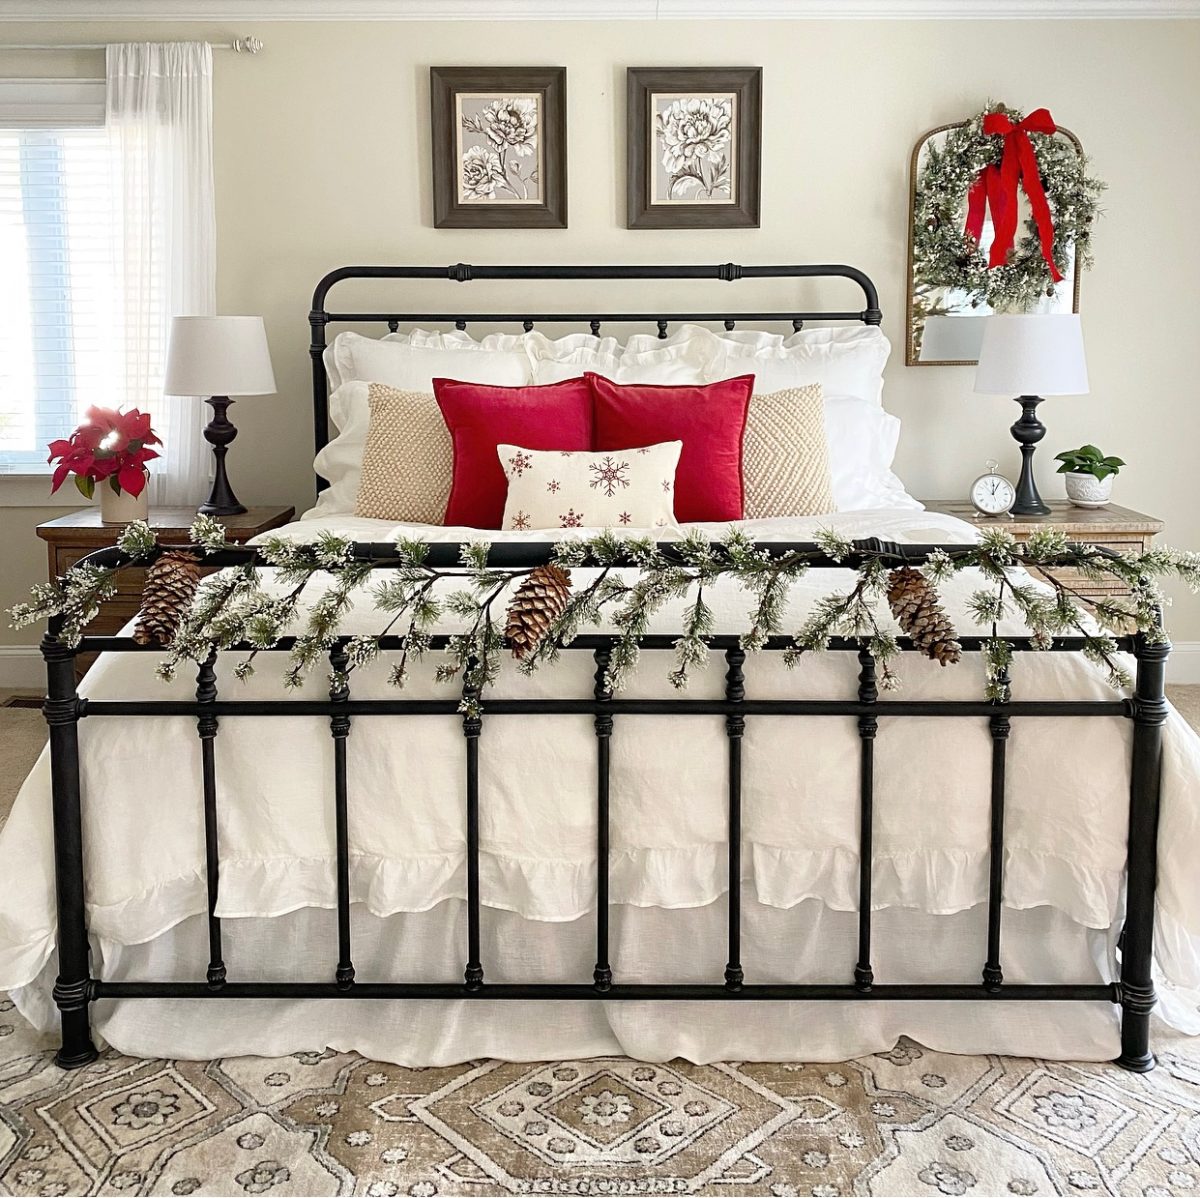 Iron bed with white linen bedding and red pillows. On the footboard it green garland and there is a wreath on the wall mirror over a nightstand.